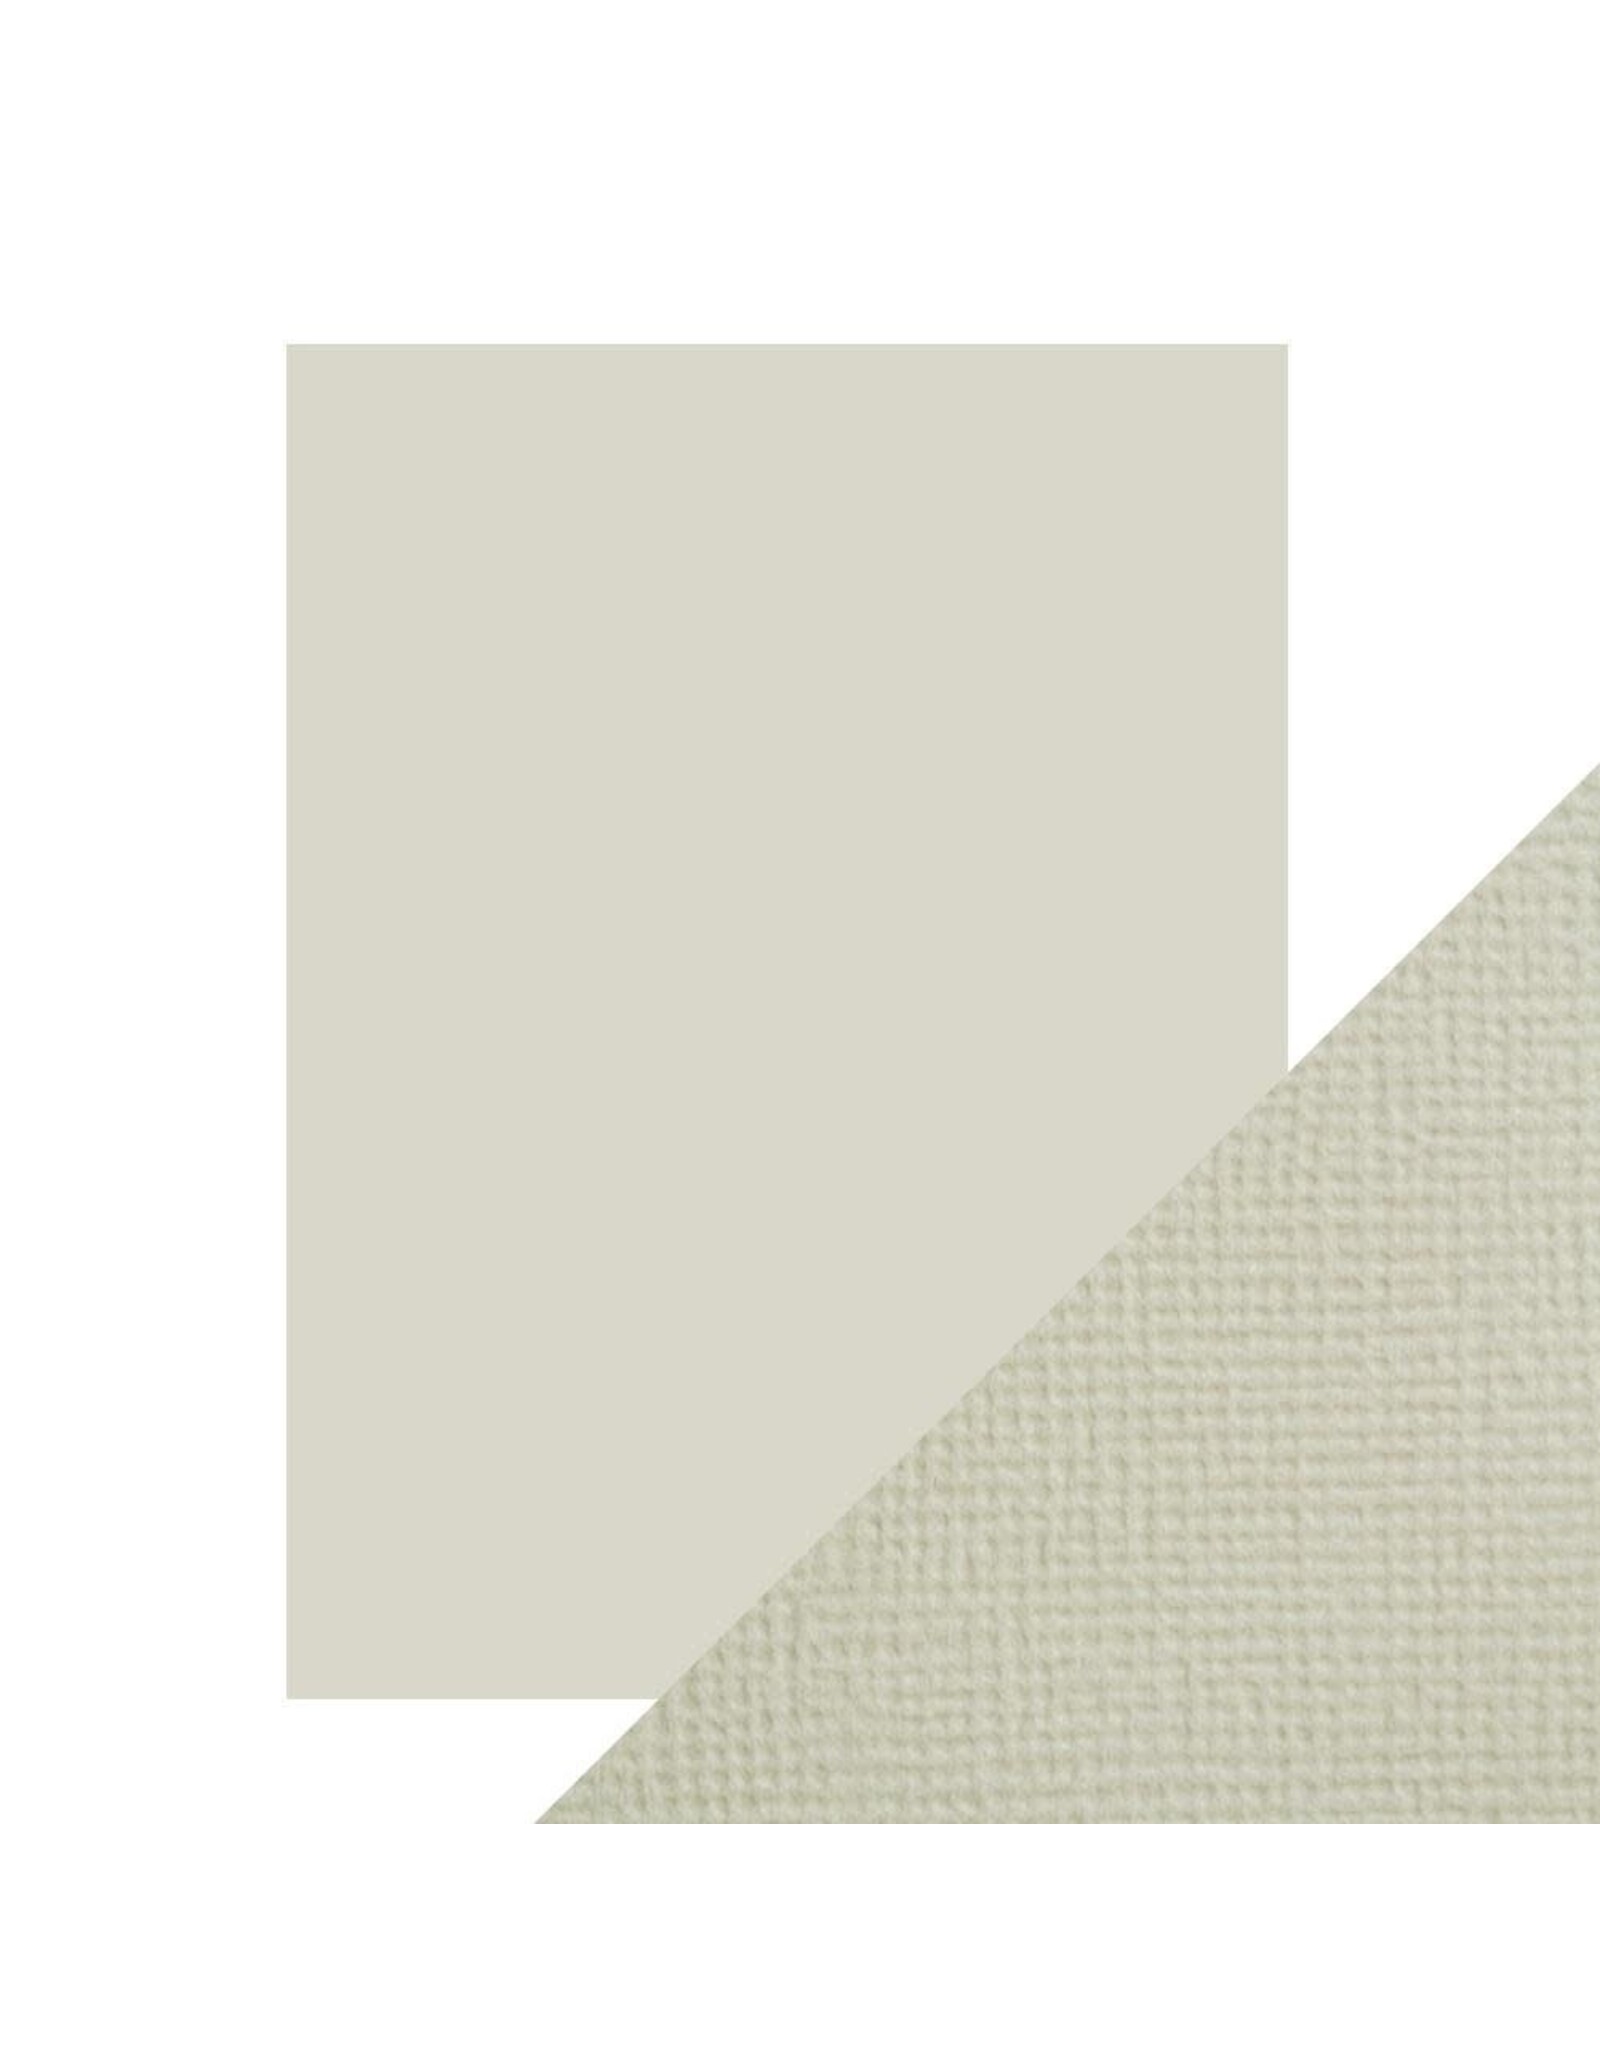 Craft Perfect Weave Textured Cardstock 8.5x11 - Oyster Grey